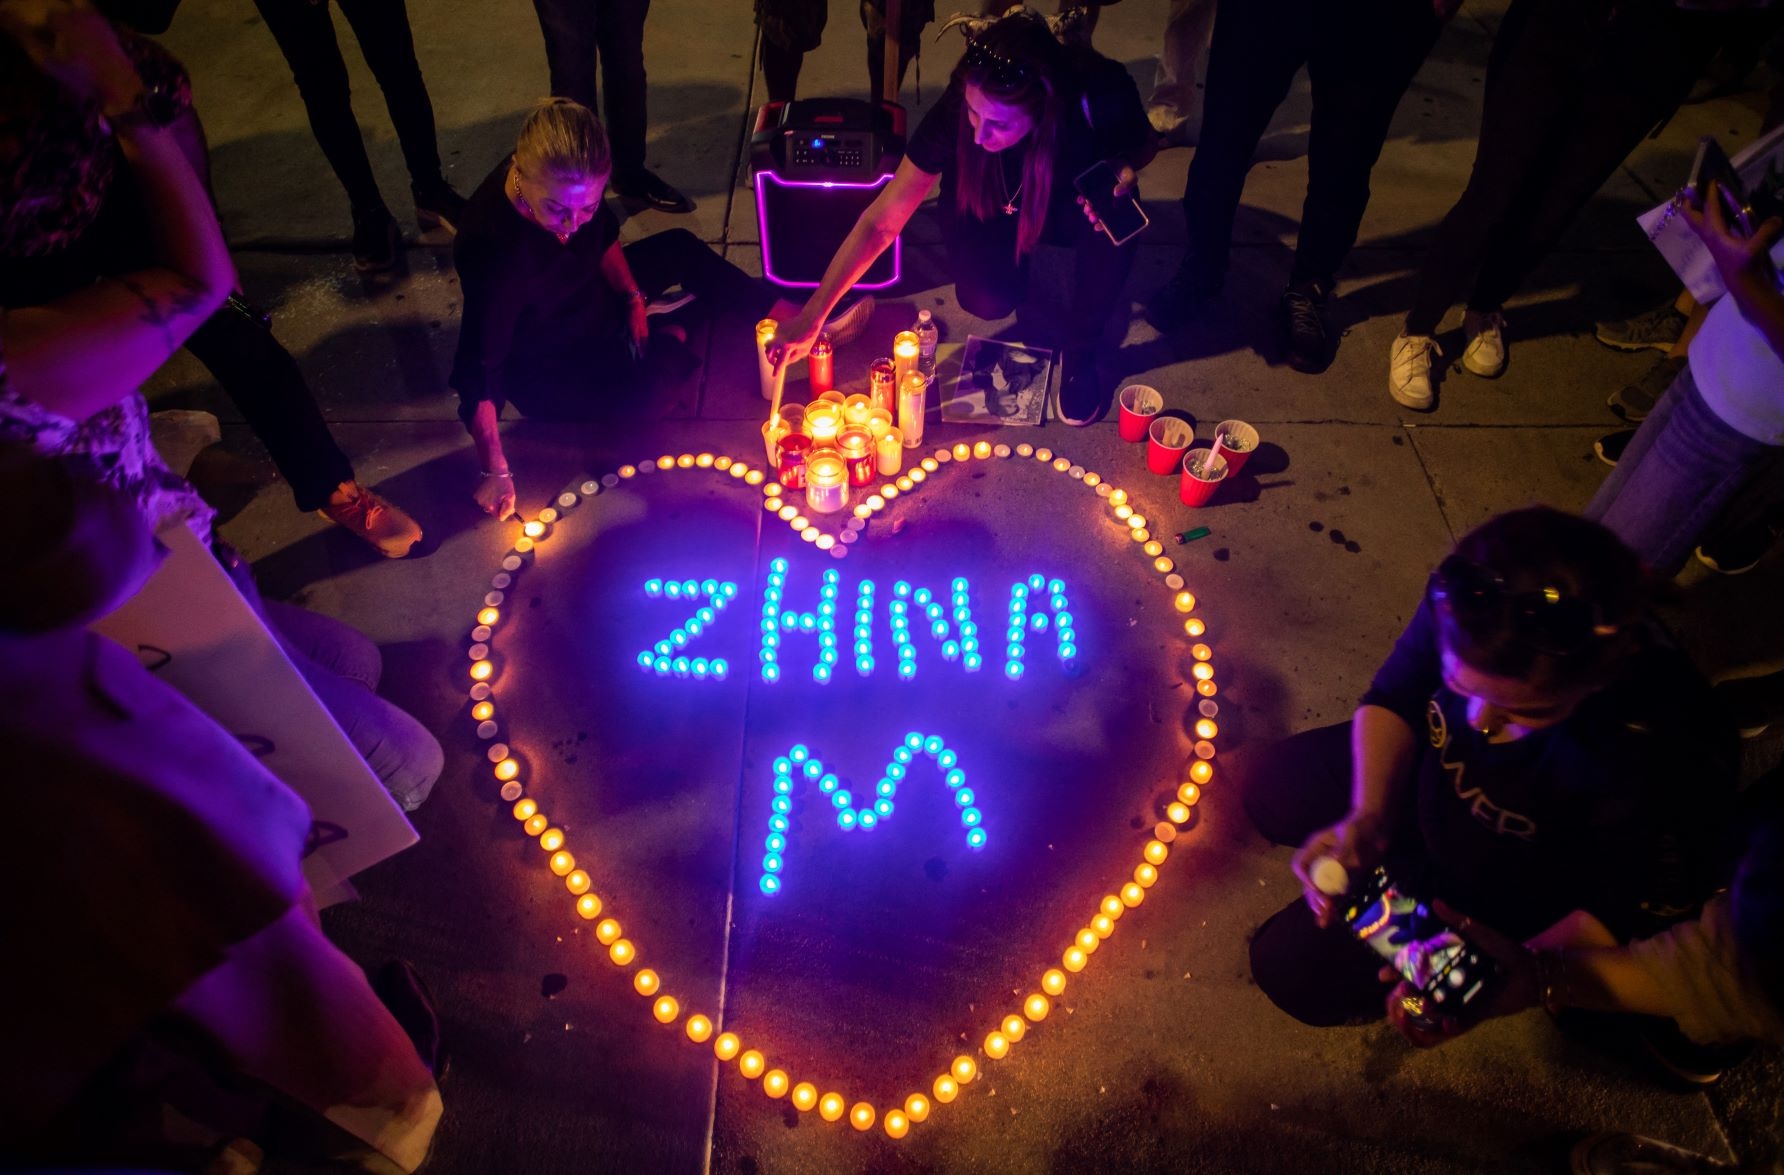 Californian Kurds hold a demonstration and candlelight vigil to honor the memory of Mahsa Amini - who also had the Kurdish name 'Zhina' - in front of the Federal Building on September 22, 2022 in Los Angeles, California (AFP)